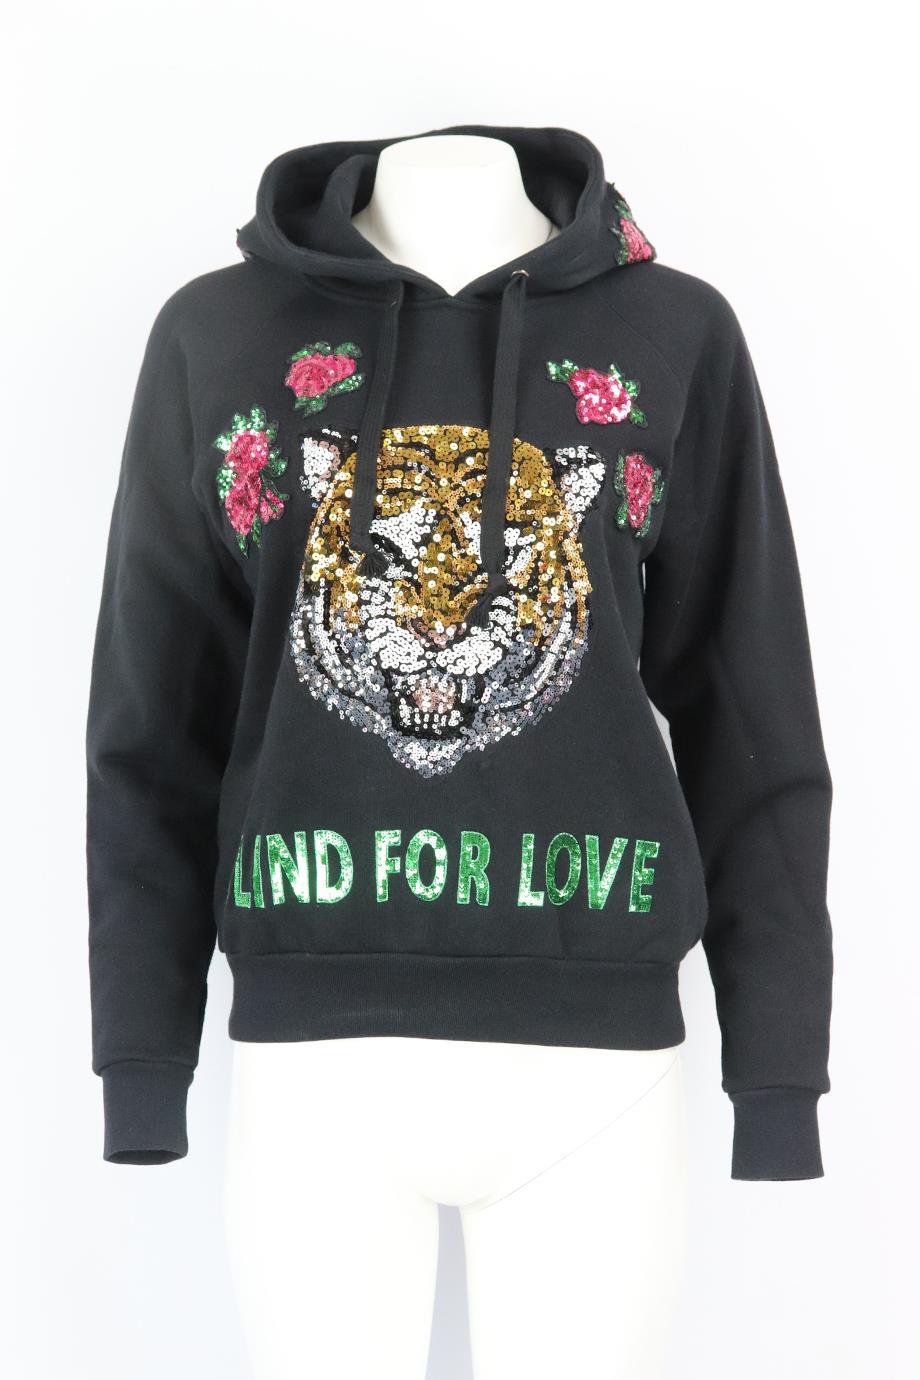 Gucci embellished cotton terry hoodie. Black. Long sleeve, crewneck. Slips on. 100% Cotton; fabric2: 95% cotton, 5% elastane. Size: XXSmall (UK 4, US 0, FR 32, IT 36). Bust: 42 in. Waist: 41 in. Hips: 35 in. Length: 23.5 in. Very good condition - No